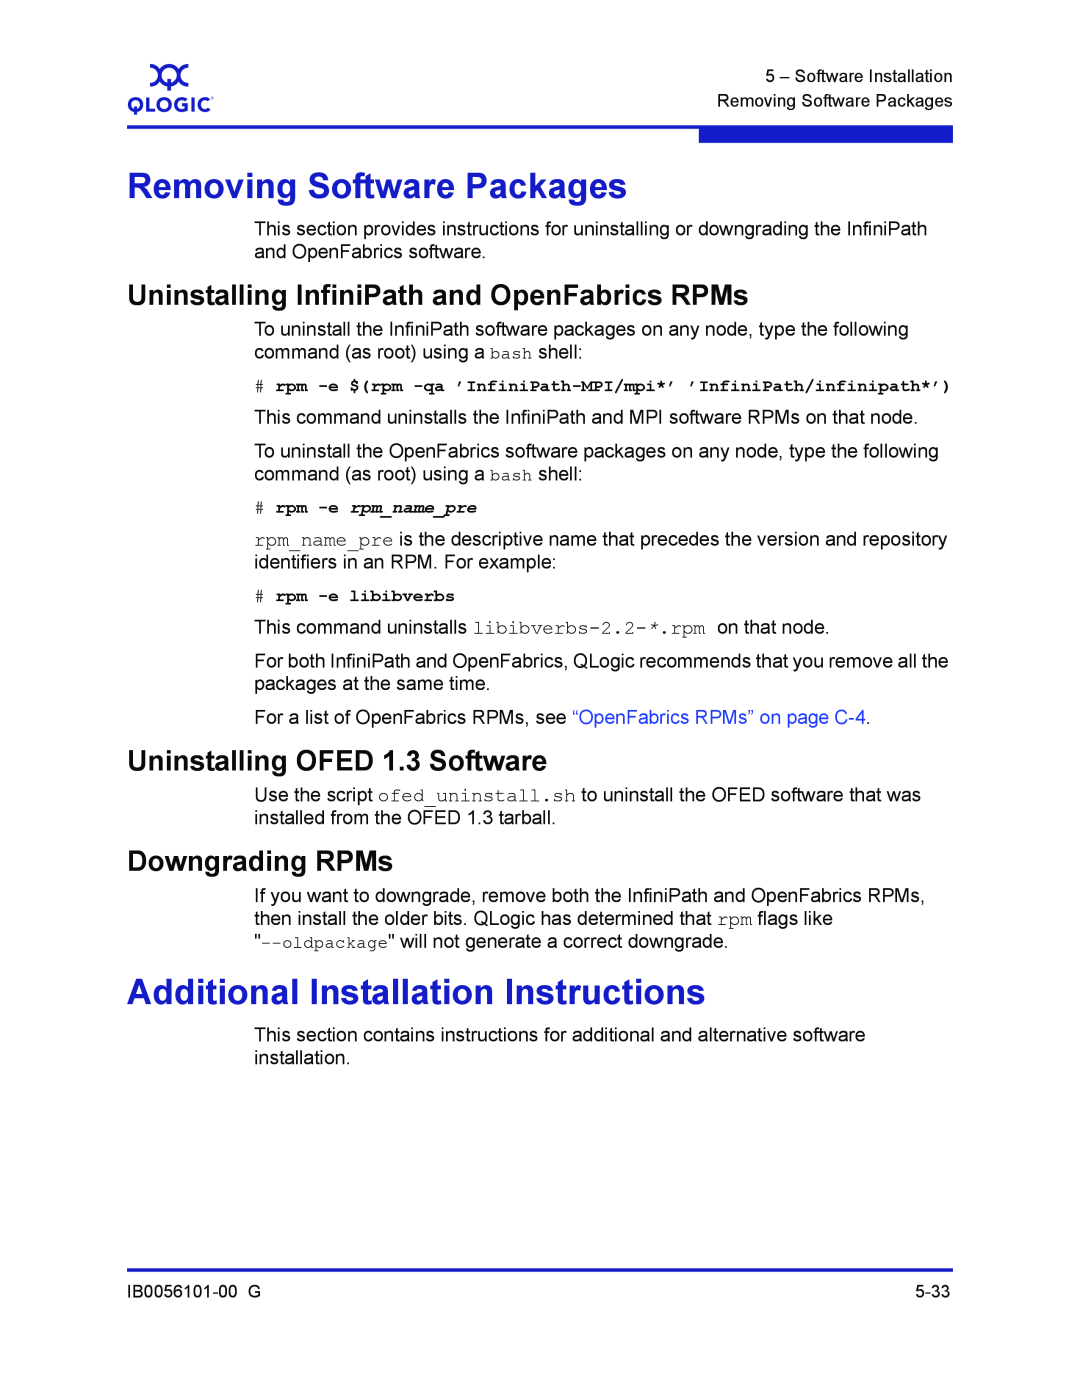 Q-Logic IB0056101-00 G Removing Software Packages, Additional Installation Instructions, Uninstalling OFED 1.3 Software 